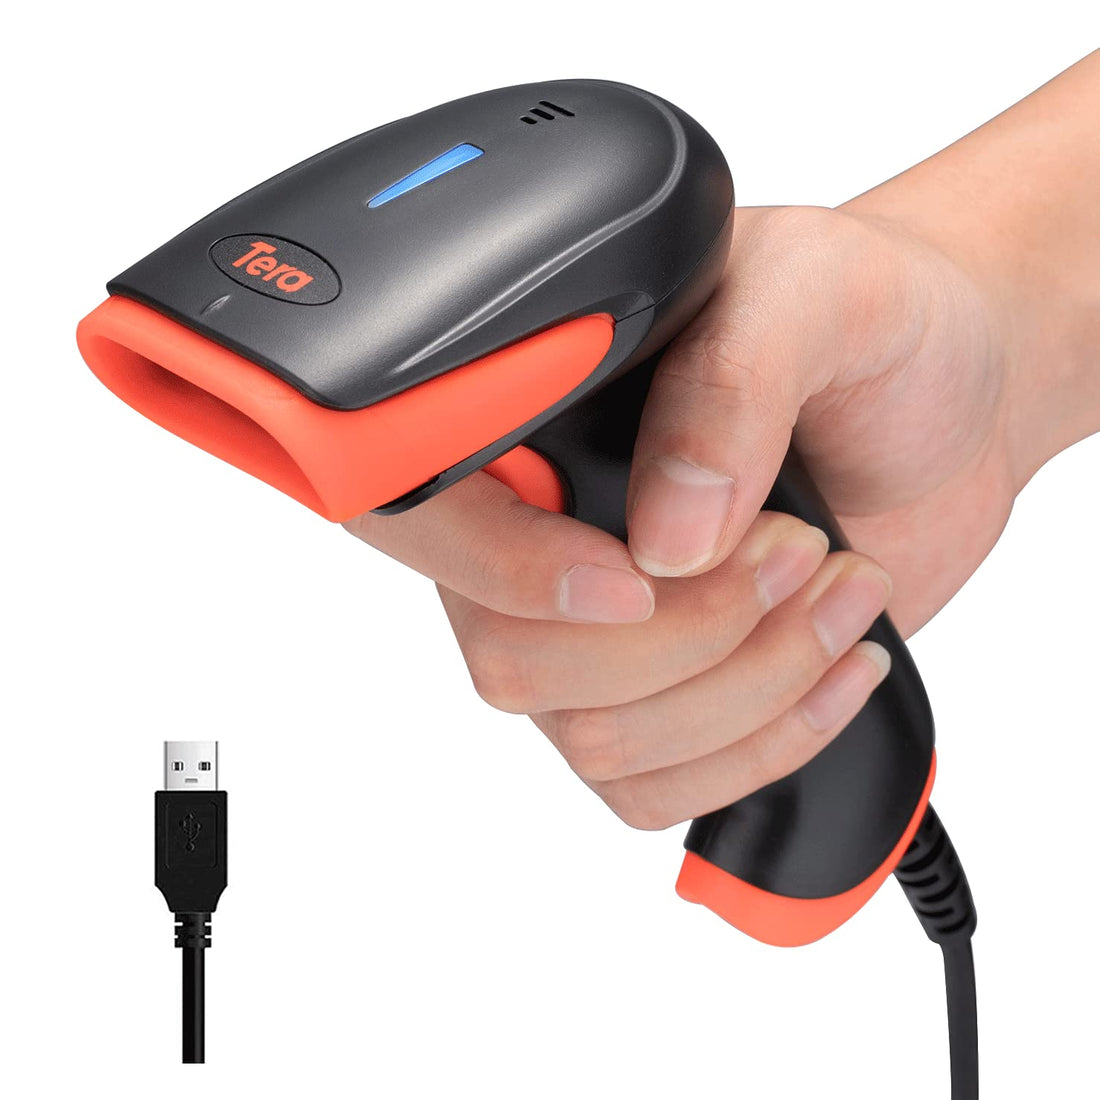 Tera 1D Wired CCD Barcode Scanner: No Laser - Eye Safe - CCD Screen Scan Handheld Bar Code Reader USB Linear Bar Code Scanner Fast and Precise Scan Plug and Play for Payment Pos, Model 1500C